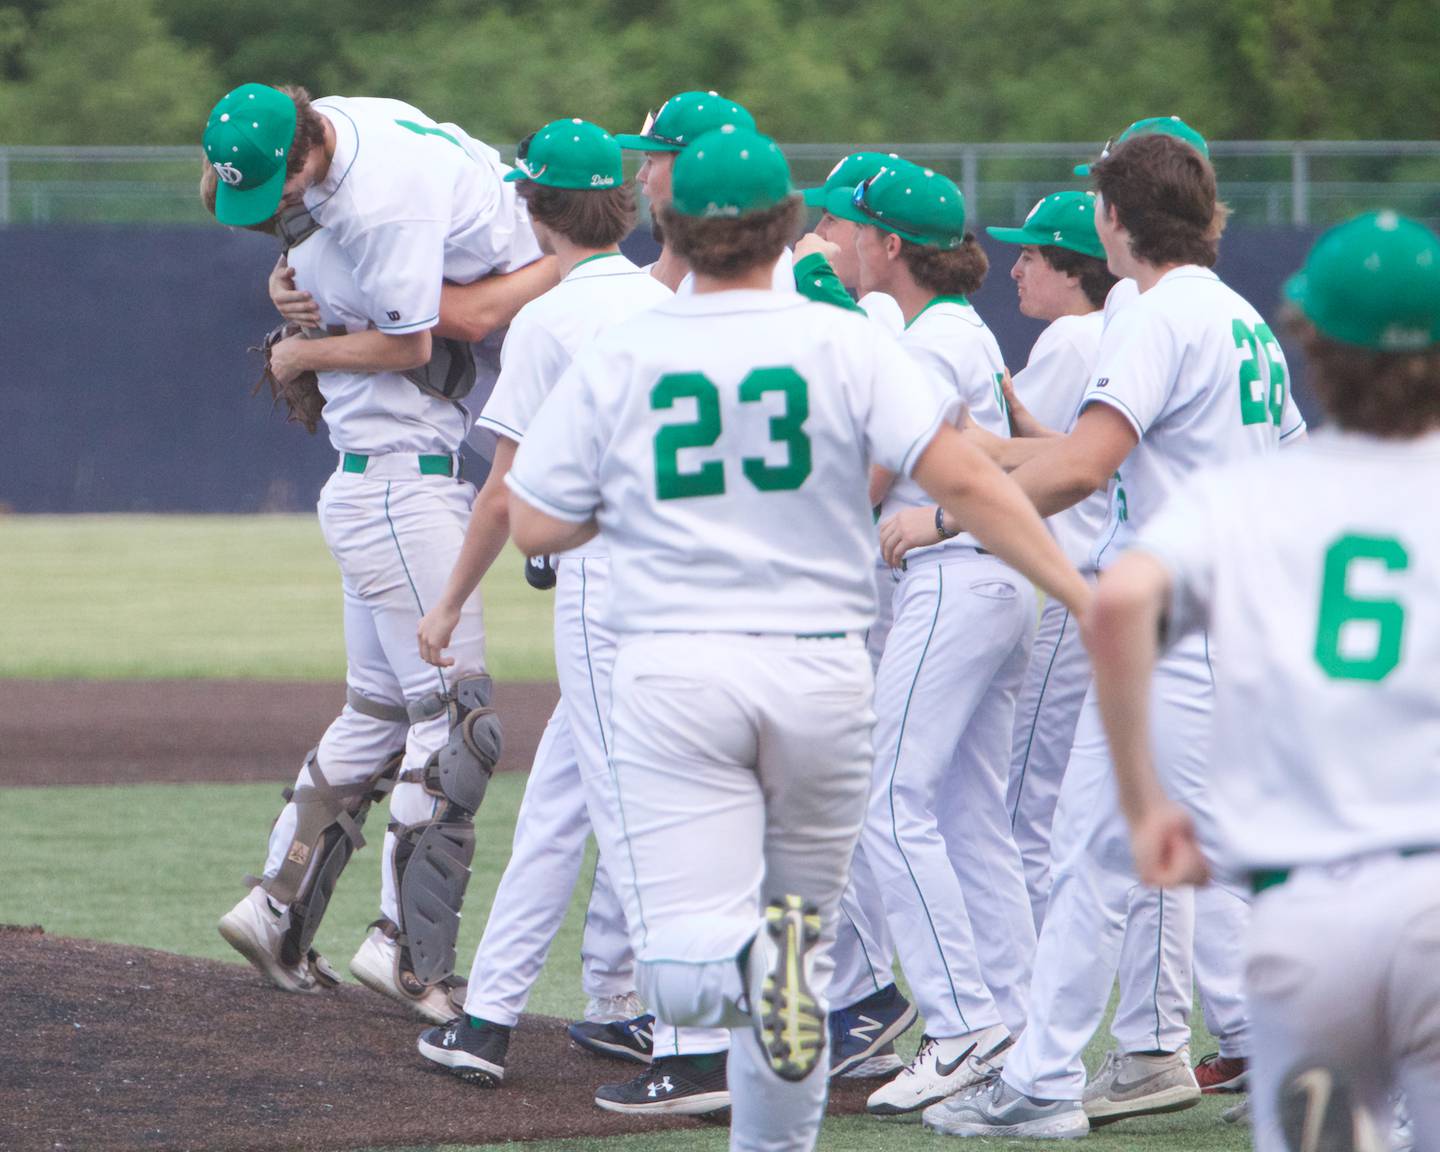 York celebrates the Win over St. Charles East 
at the Class 4A Sectional Semi Final on Wednesday, May 31, 2023 in Elgin.